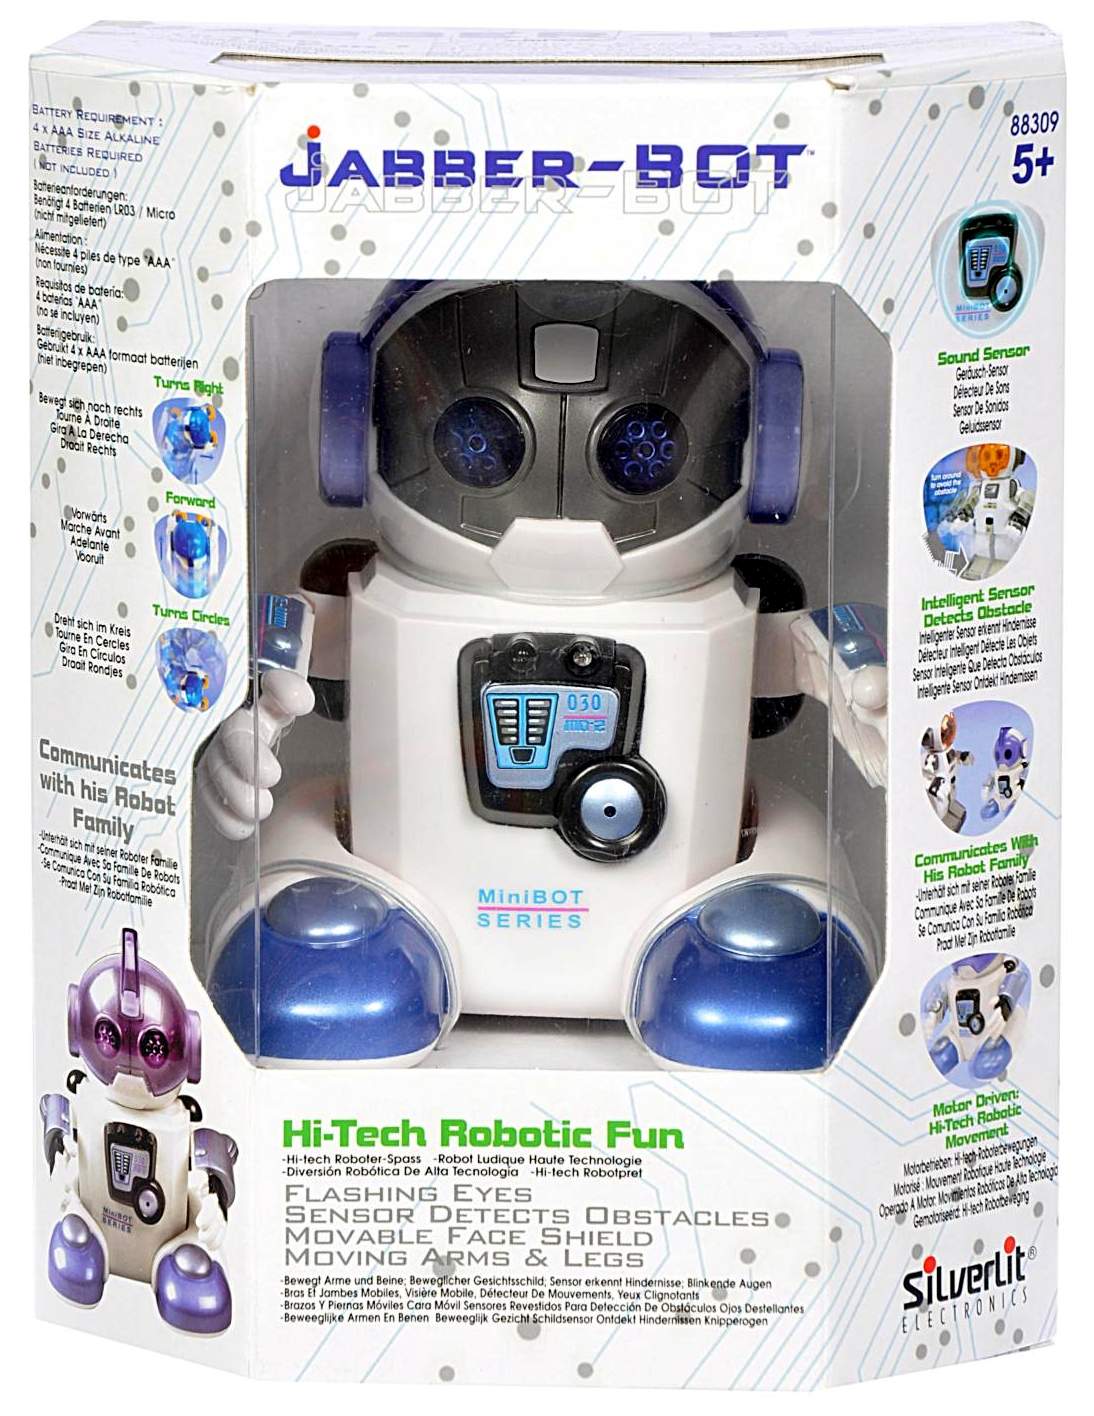 Jabber-Bot Robot by Silverlit - The Old Robots Web Site